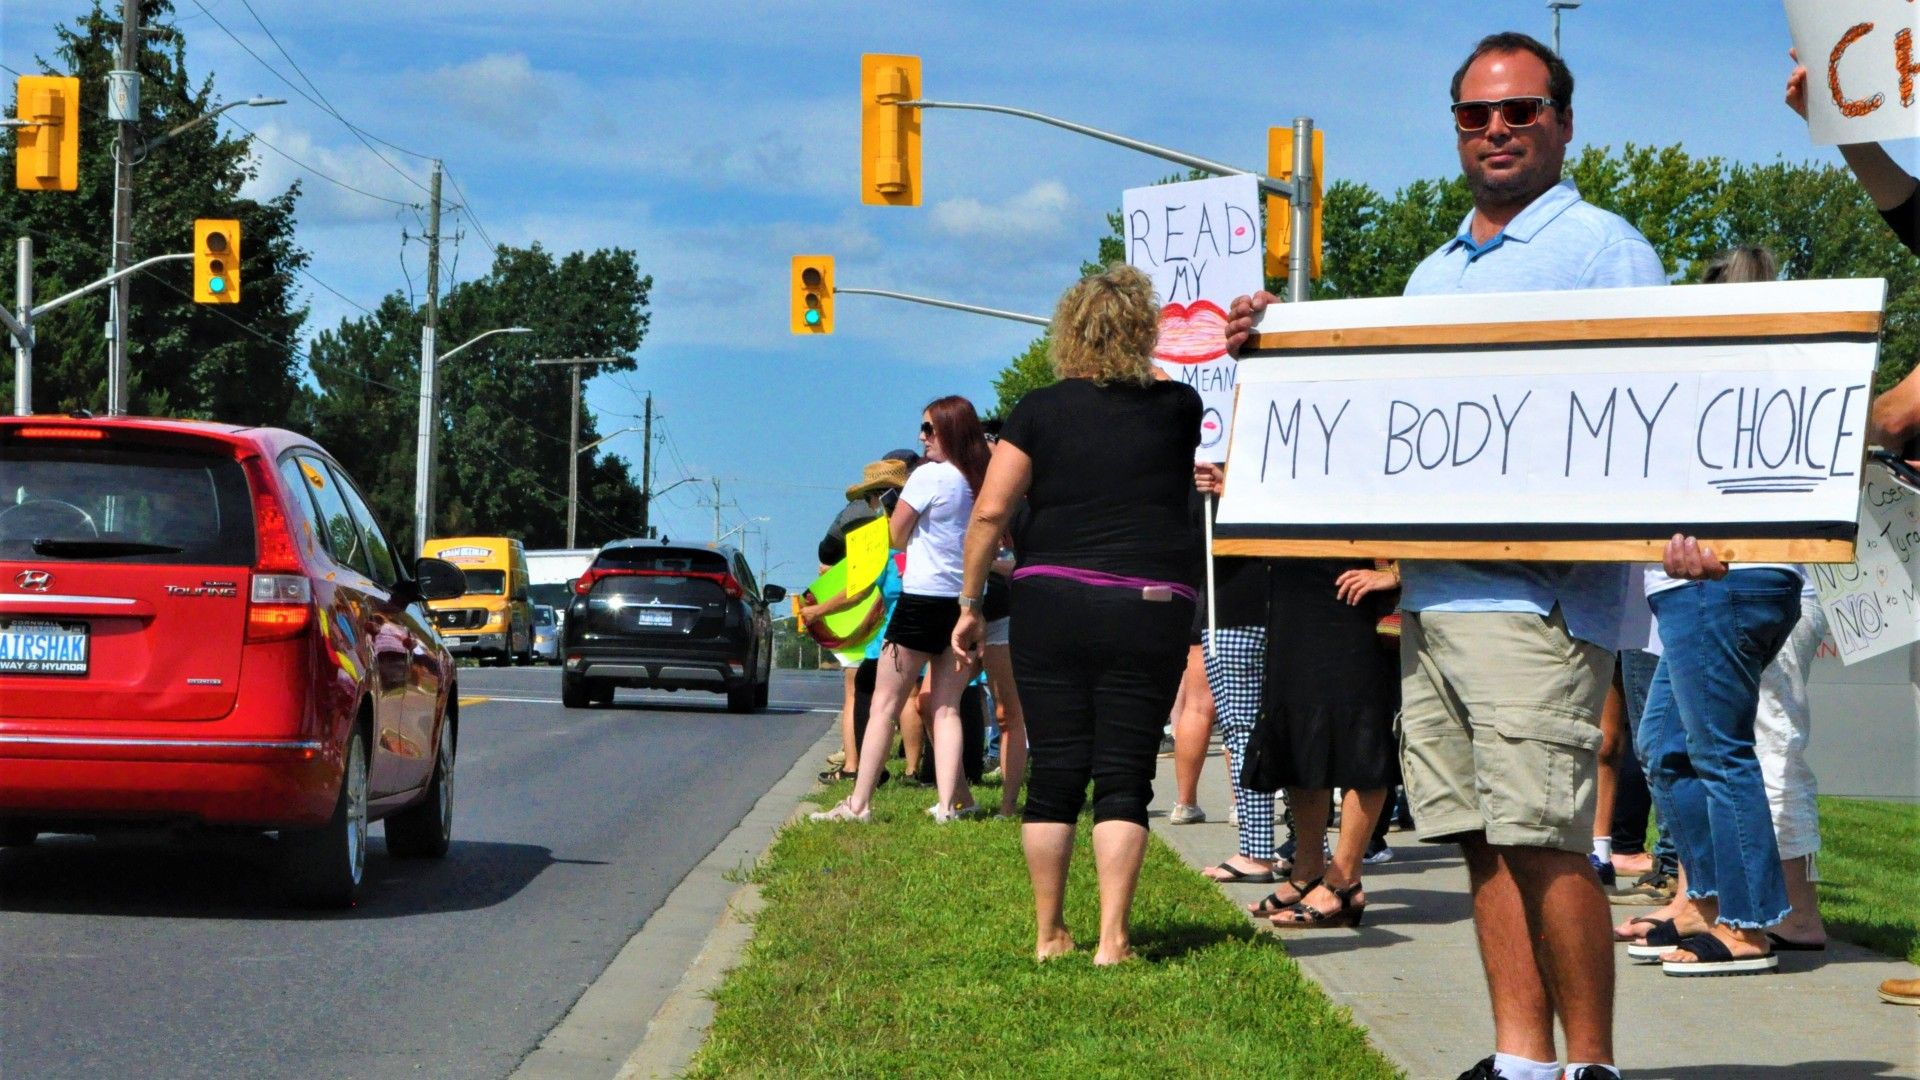 A crowd attends an anti-vaccine mandate protest in front of the in front of the Cornwall Community Hospital in Cornwall, Ont. on Sept. 9, 2021. (Francis Racine / Cornwall Standard-Freeholder / Postmedia Network)